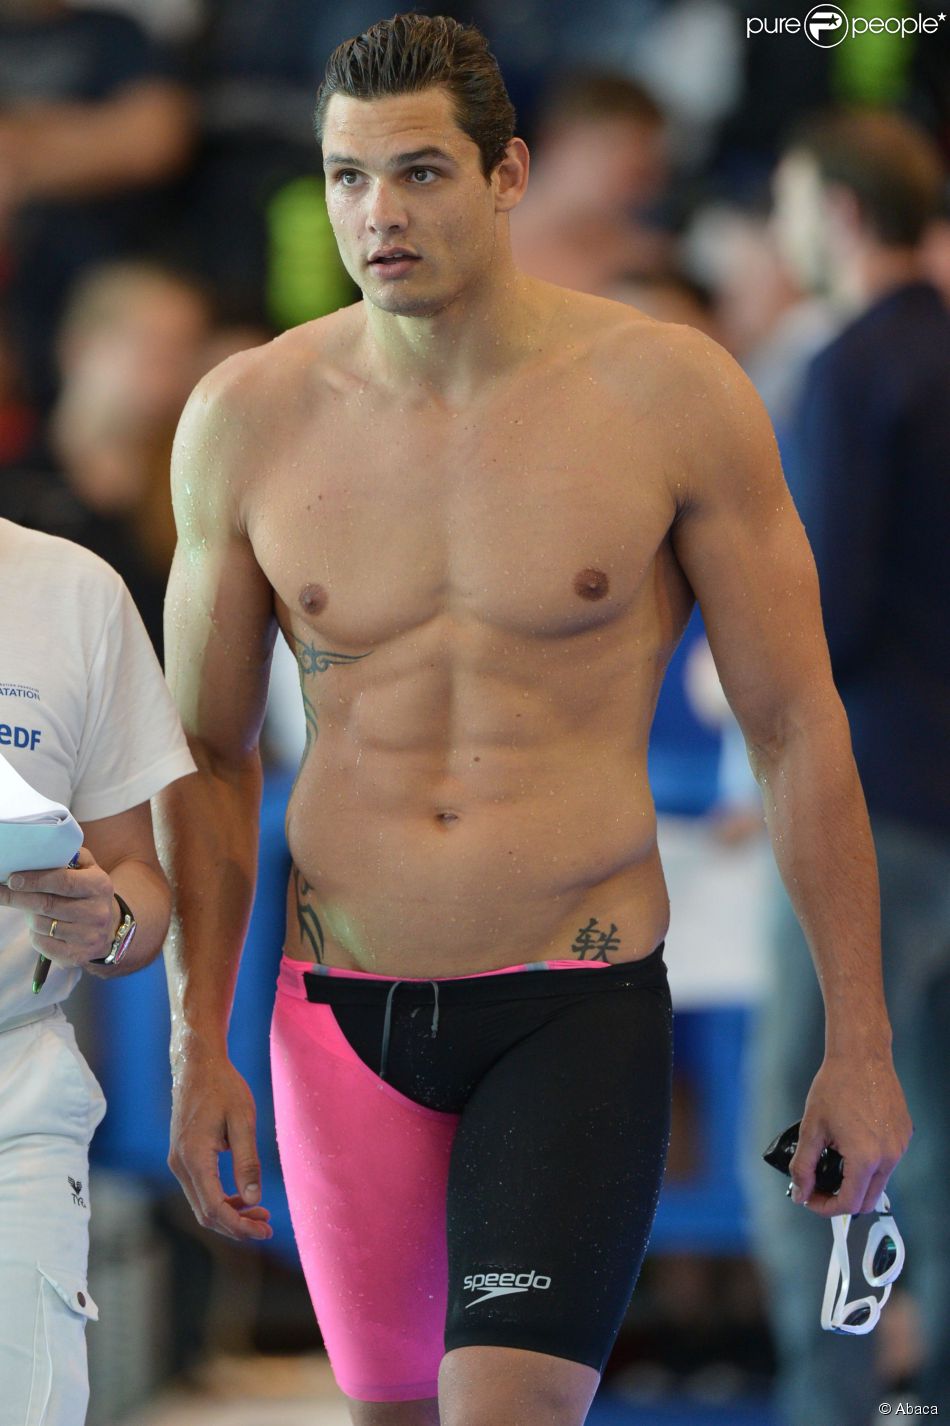 Swimmers Have The Best Bods Evidence E 8619862 Florent Manaudou Bare Men Olympic Sports Swimmer